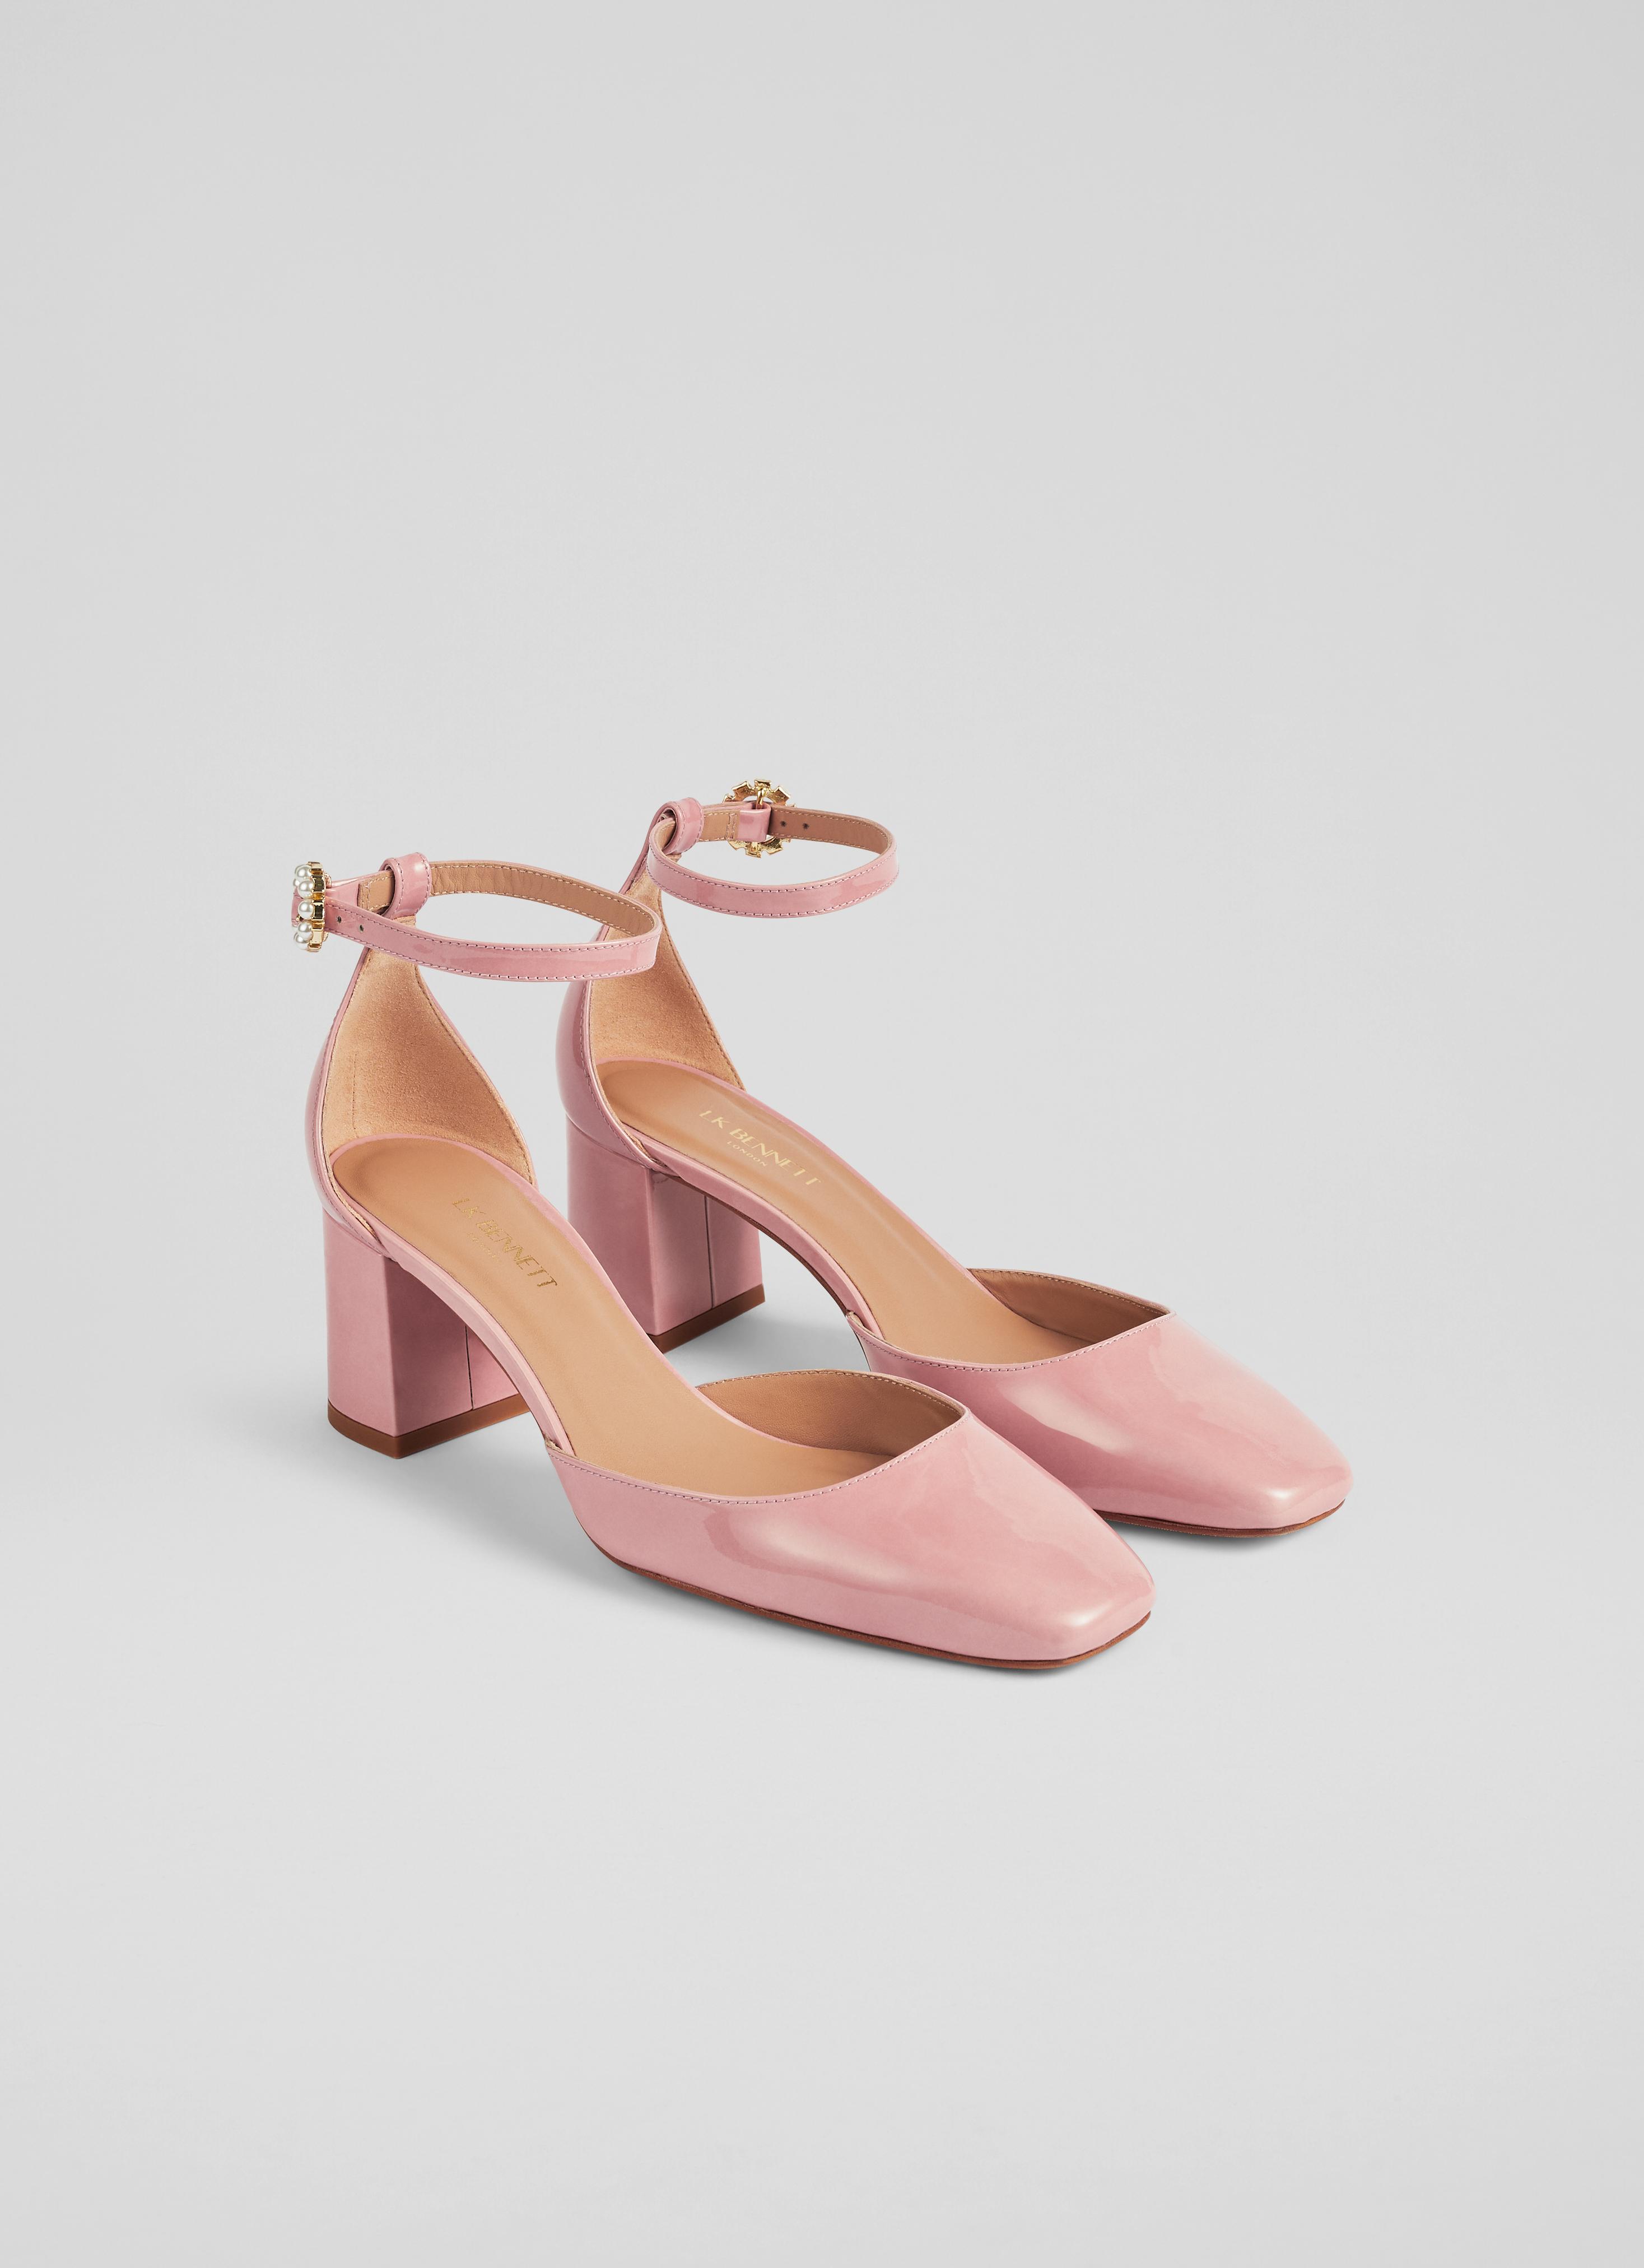 Darling Pink Patent Leather D'orsay Courts